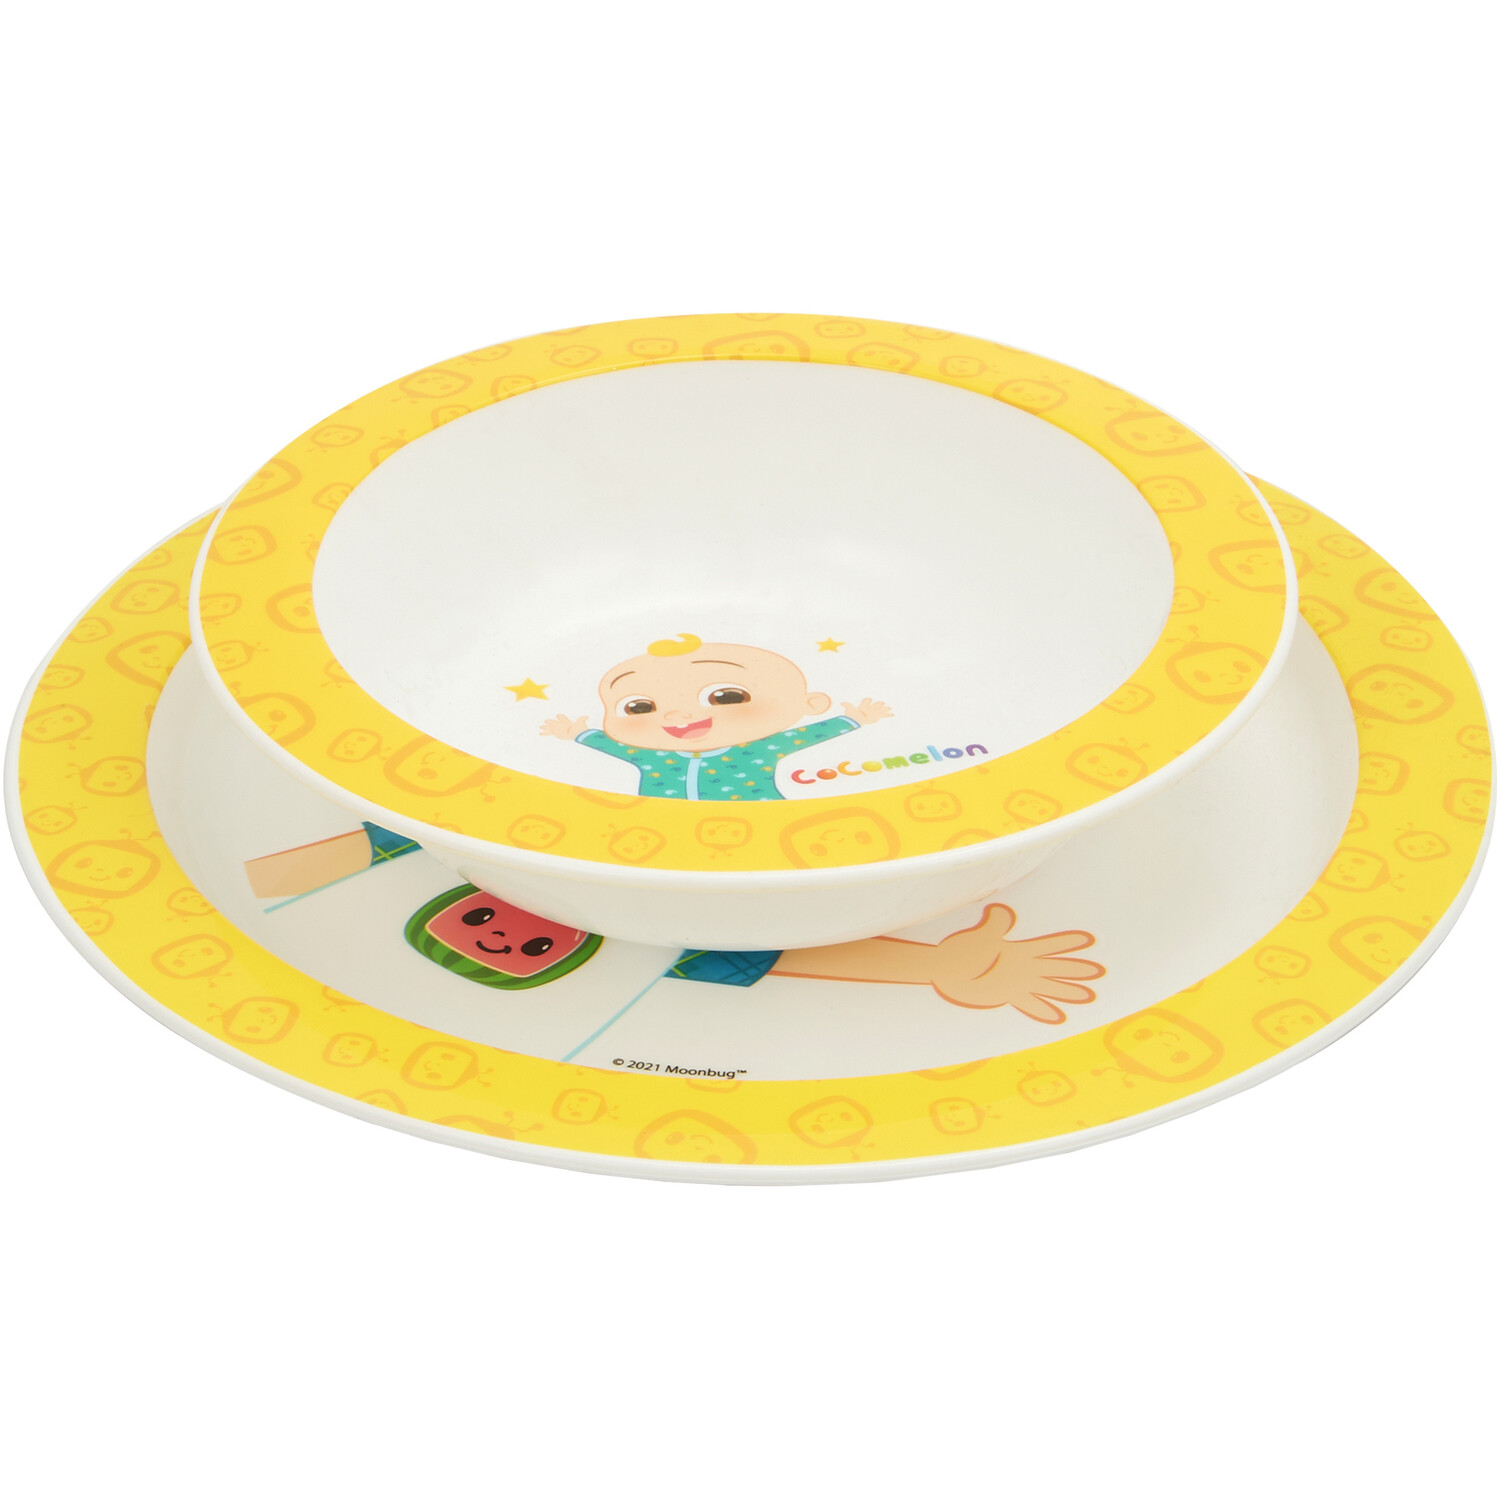 5-Piece Cocomelon Dinner Set - Yellow Image 2